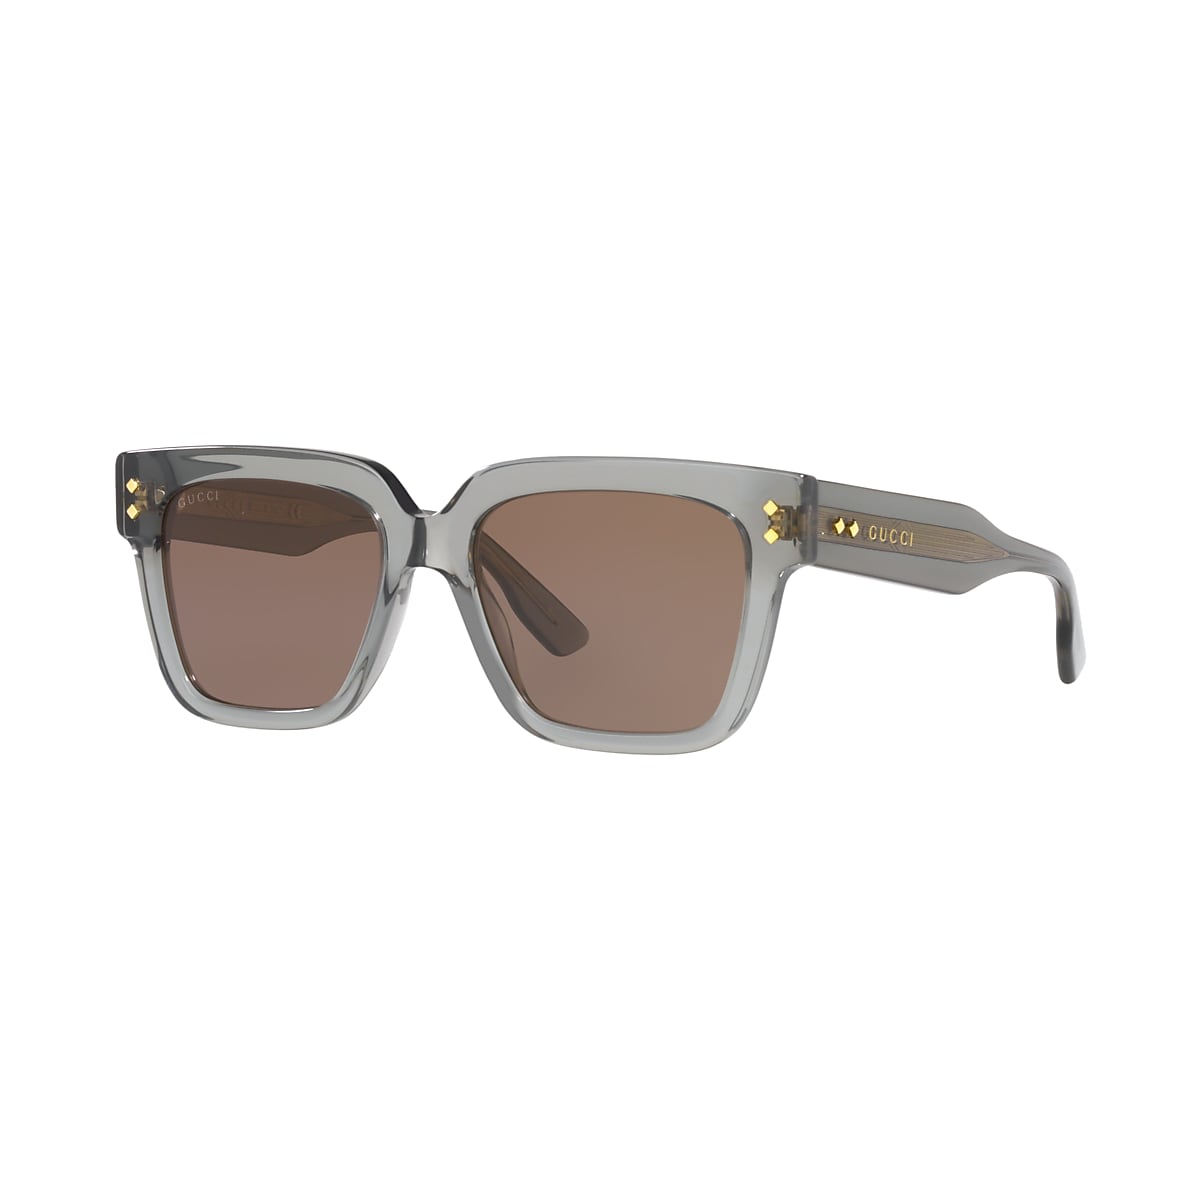 GUCCI GG1084S Grey - Unisex Luxury Sunglasses, Solid Brown Lens